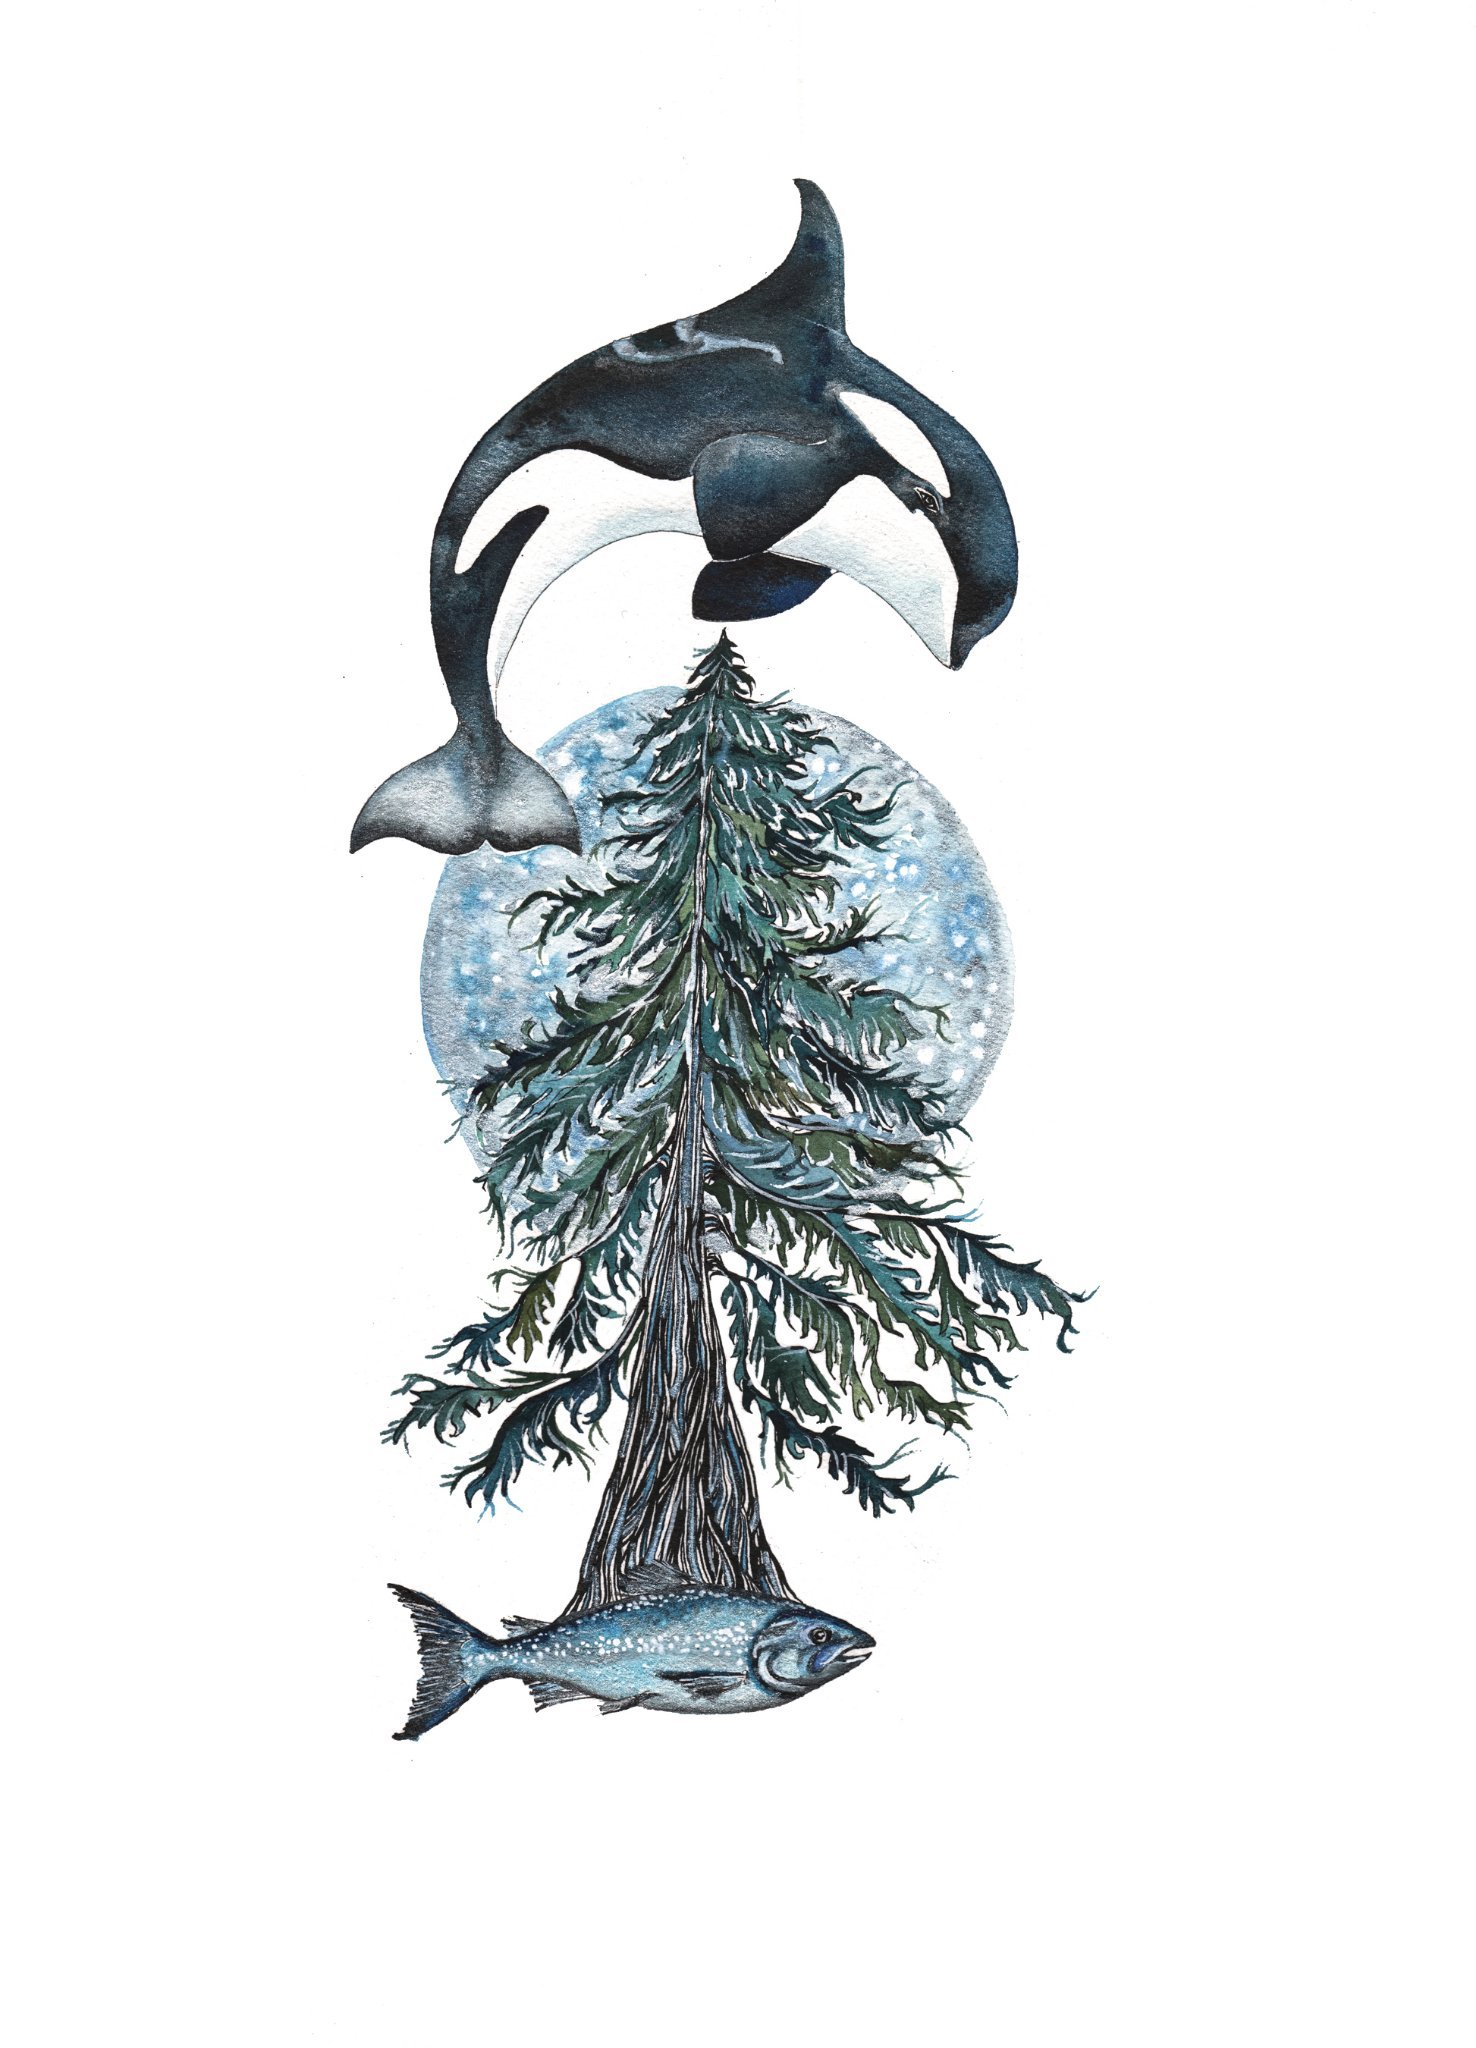 Raising awareness and offering solutions to save the Southern Resident Orcas and the Chinook Salmon they depend upon.